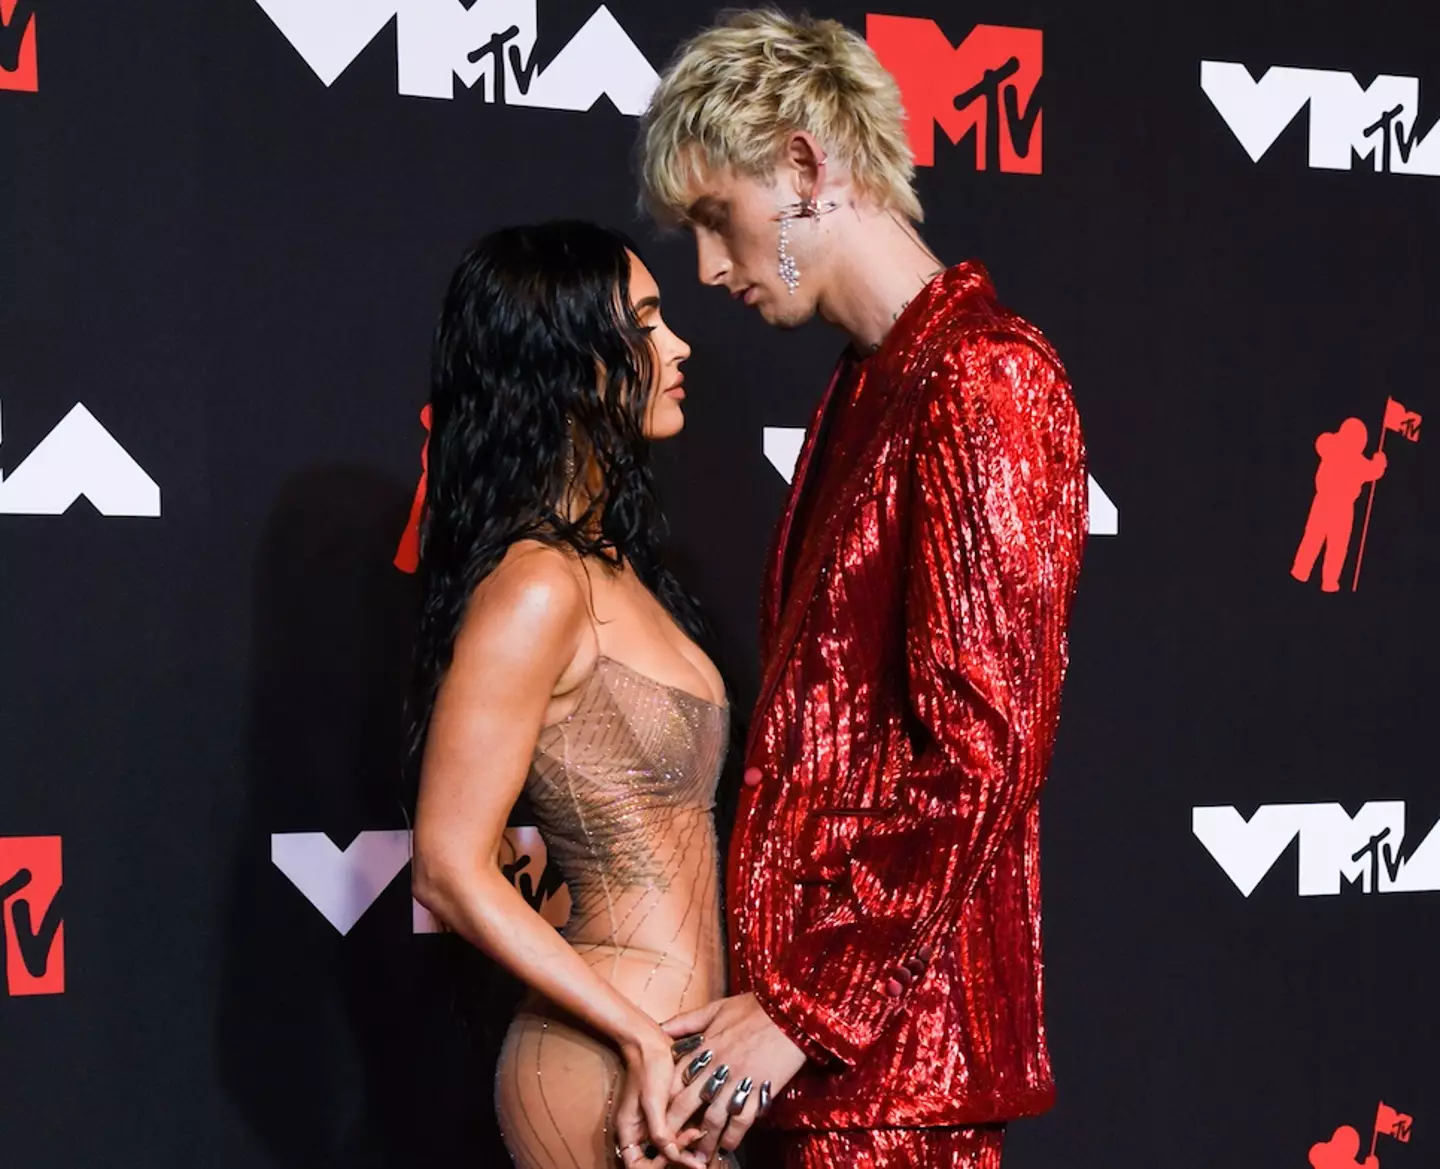 Megan and Machine Gun Kelly embrace each other at the MTV VMAs. (